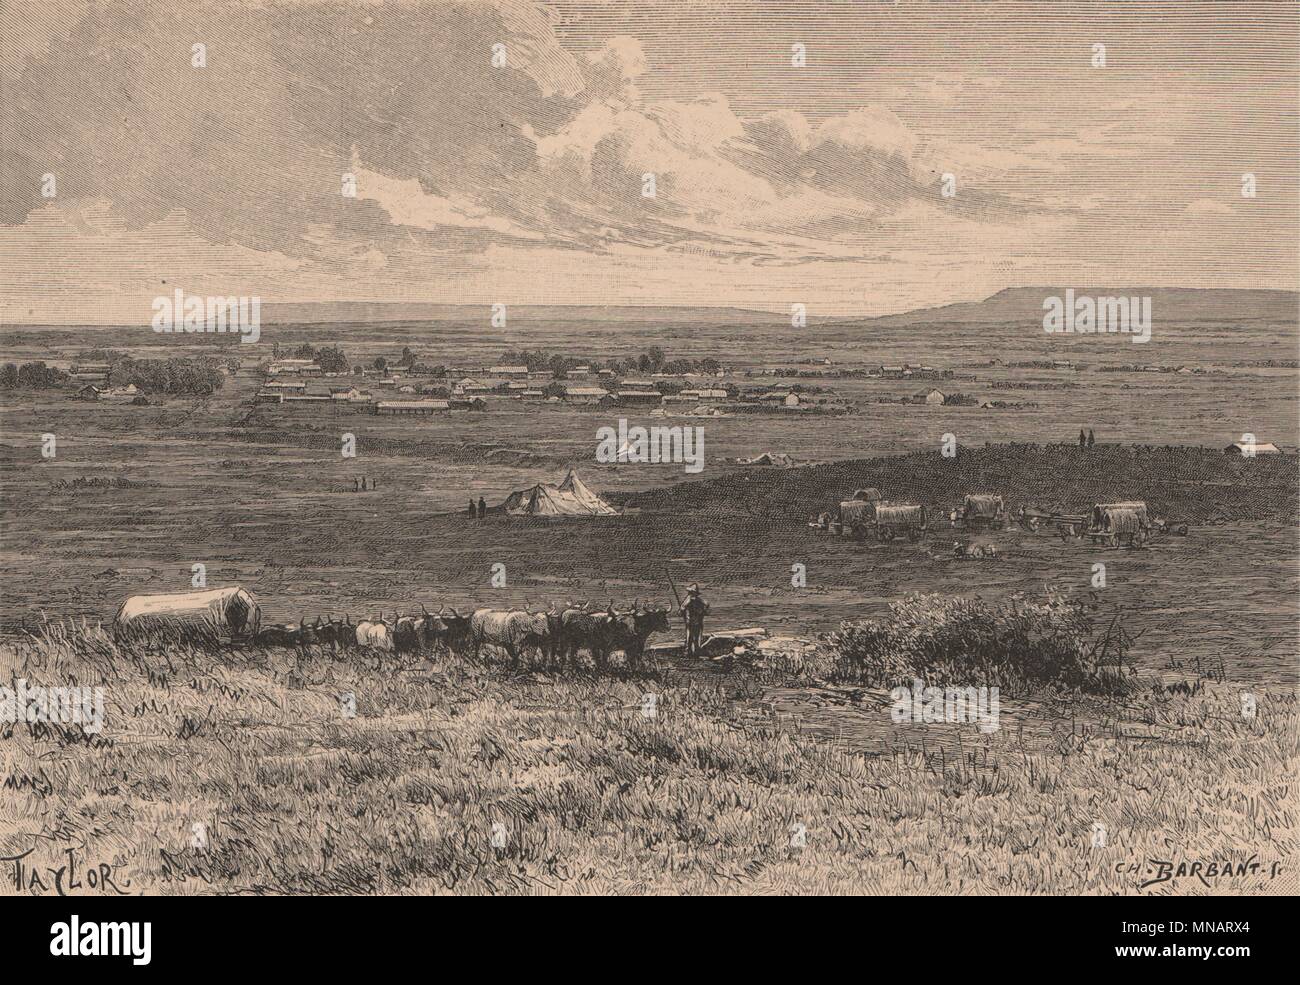 Landscape on the East Frontier of Transvaal. South Africa 1885 old print Stock Photo